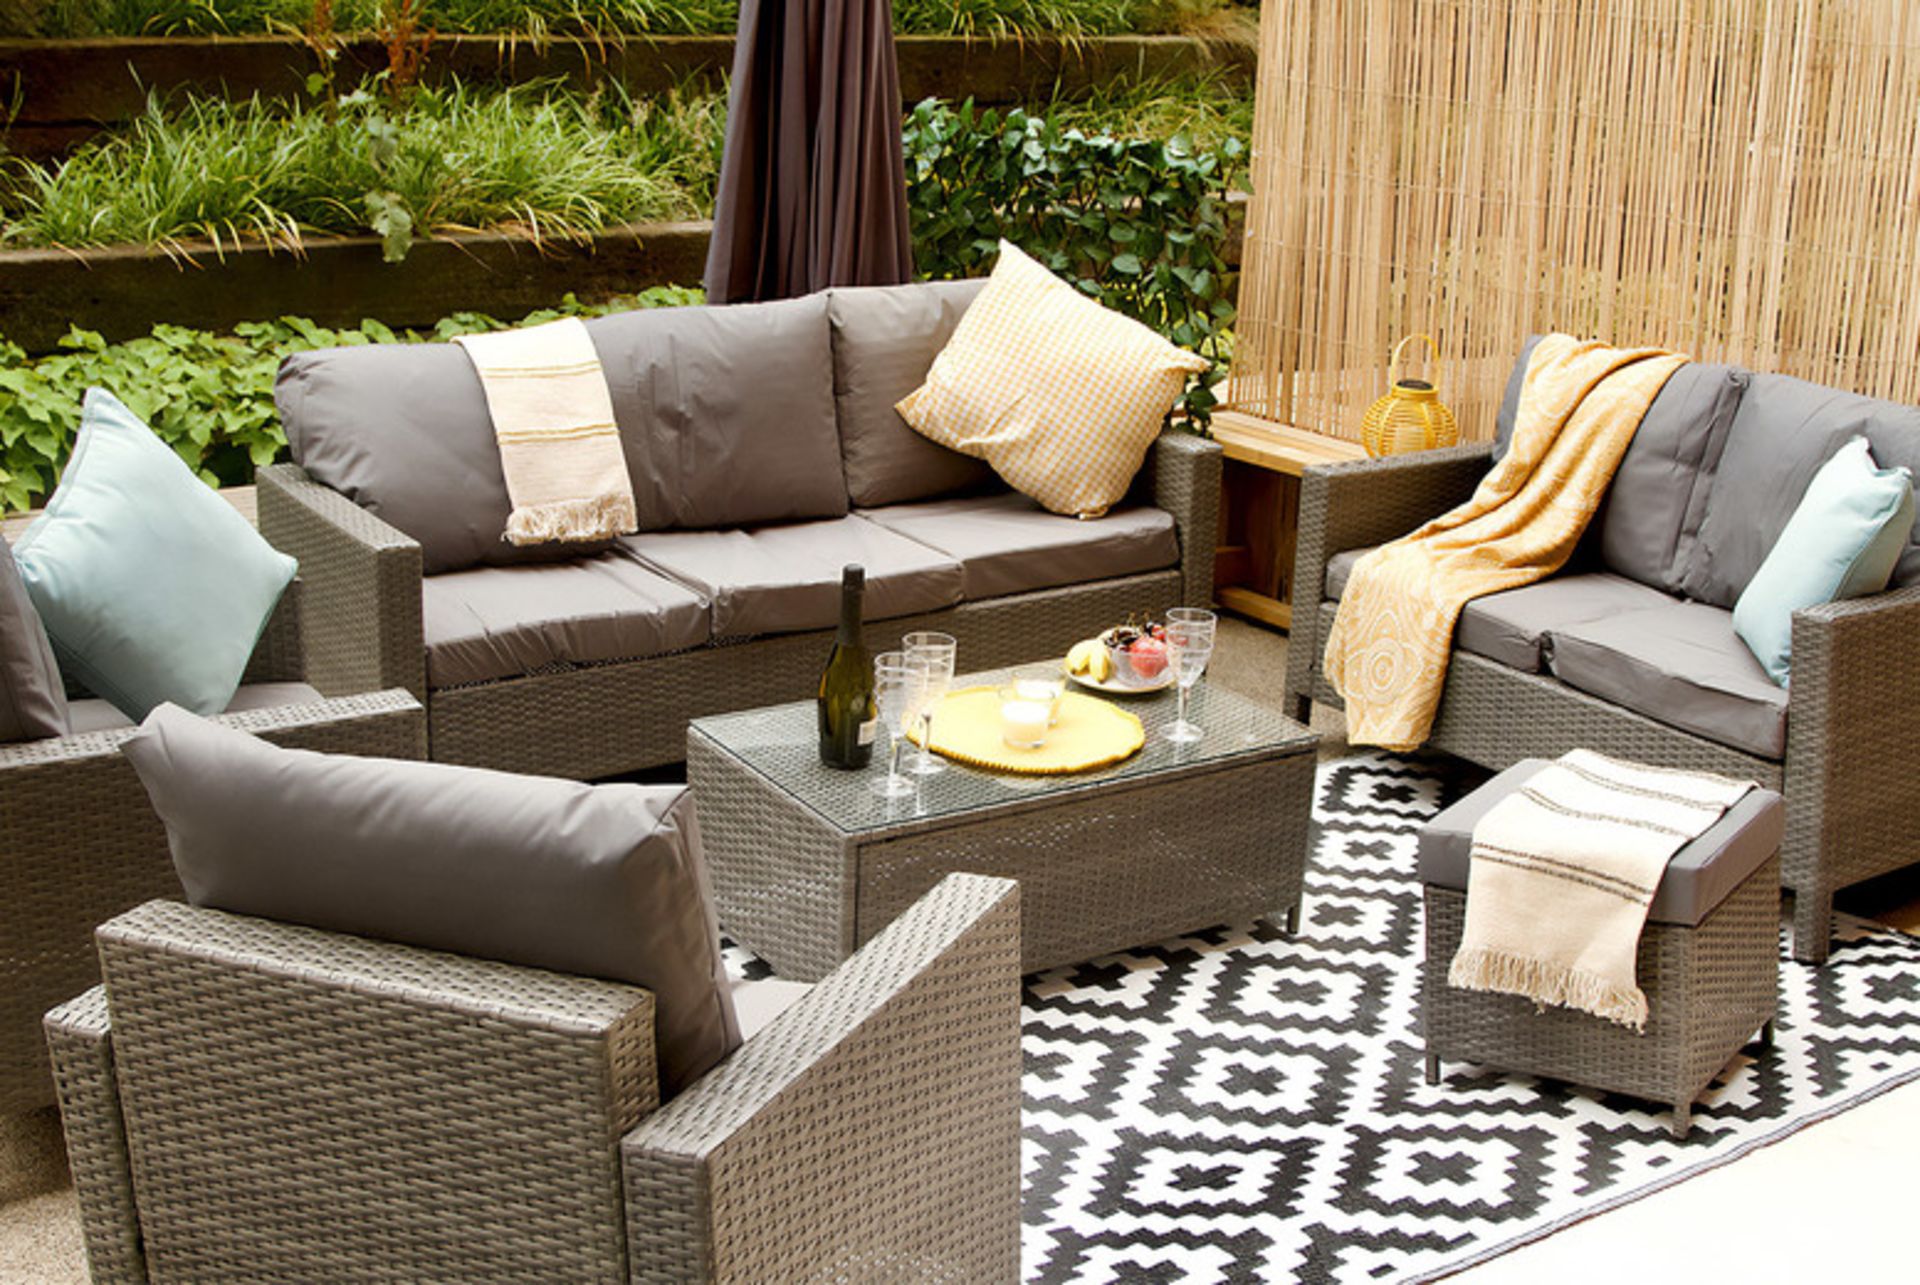 FREE DELIVERY - 8-SEATER RATTAN CHAIR & SOFA GARDEN FURNITURE SET - GREY